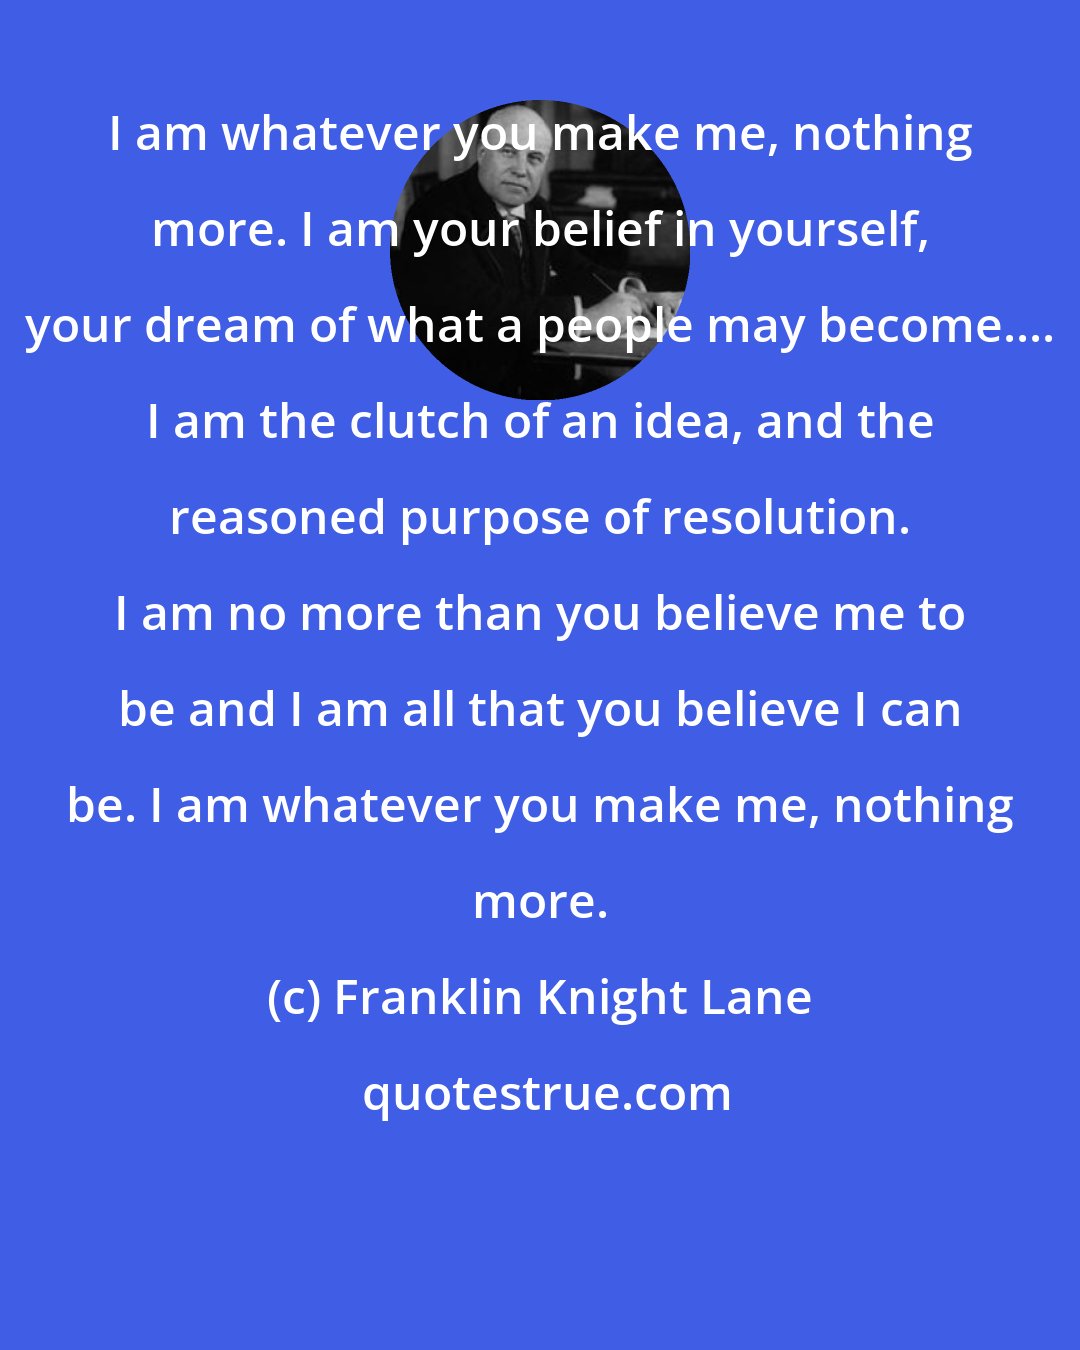 Franklin Knight Lane: I am whatever you make me, nothing more. I am your belief in yourself, your dream of what a people may become.... I am the clutch of an idea, and the reasoned purpose of resolution. I am no more than you believe me to be and I am all that you believe I can be. I am whatever you make me, nothing more.